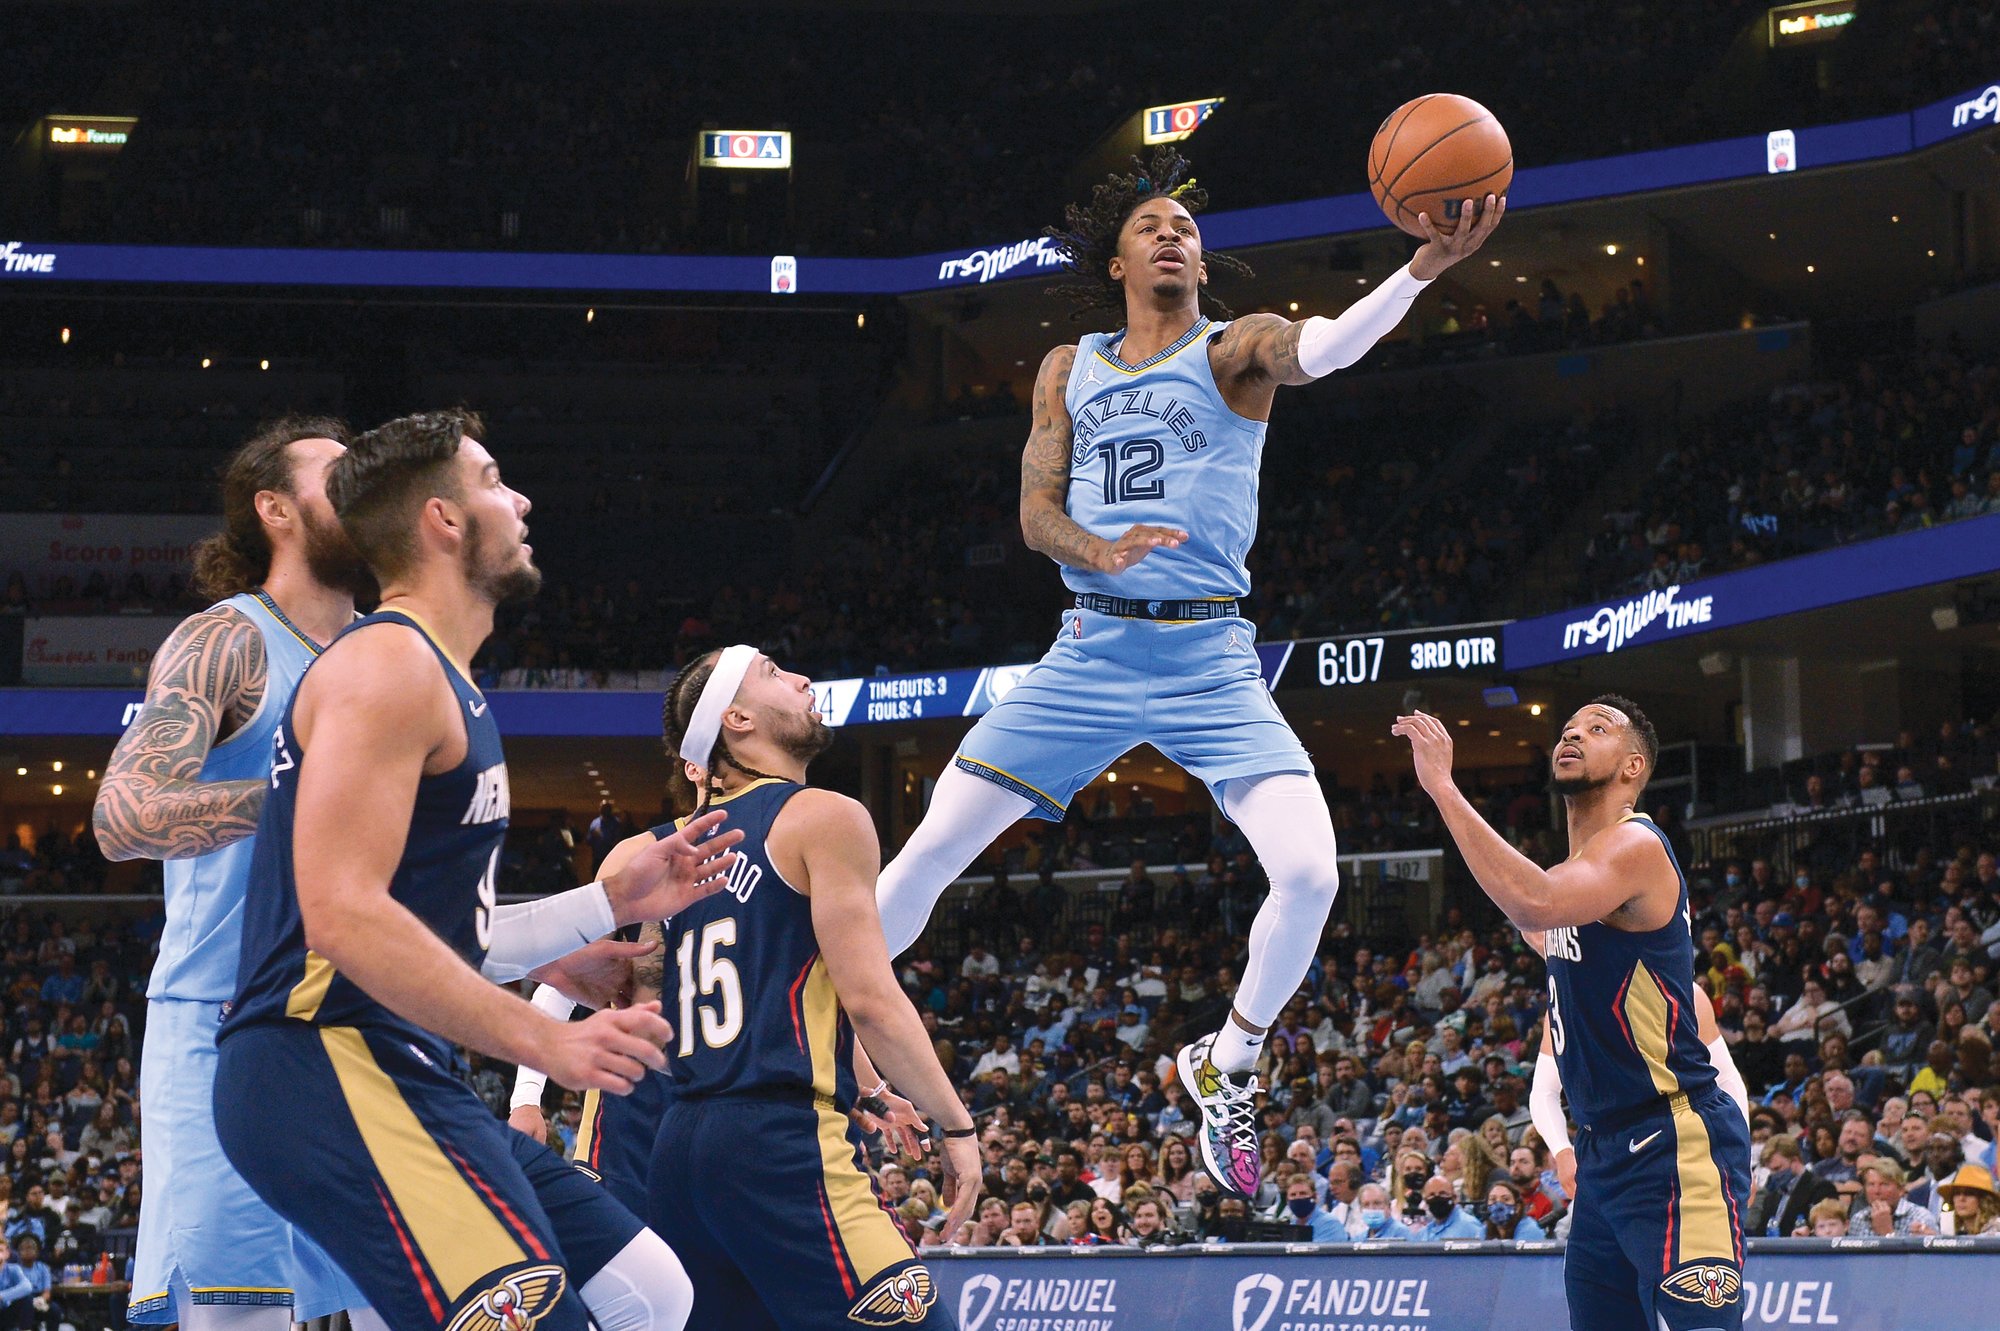 Ja Morant says his injury cost Memphis their playoff series